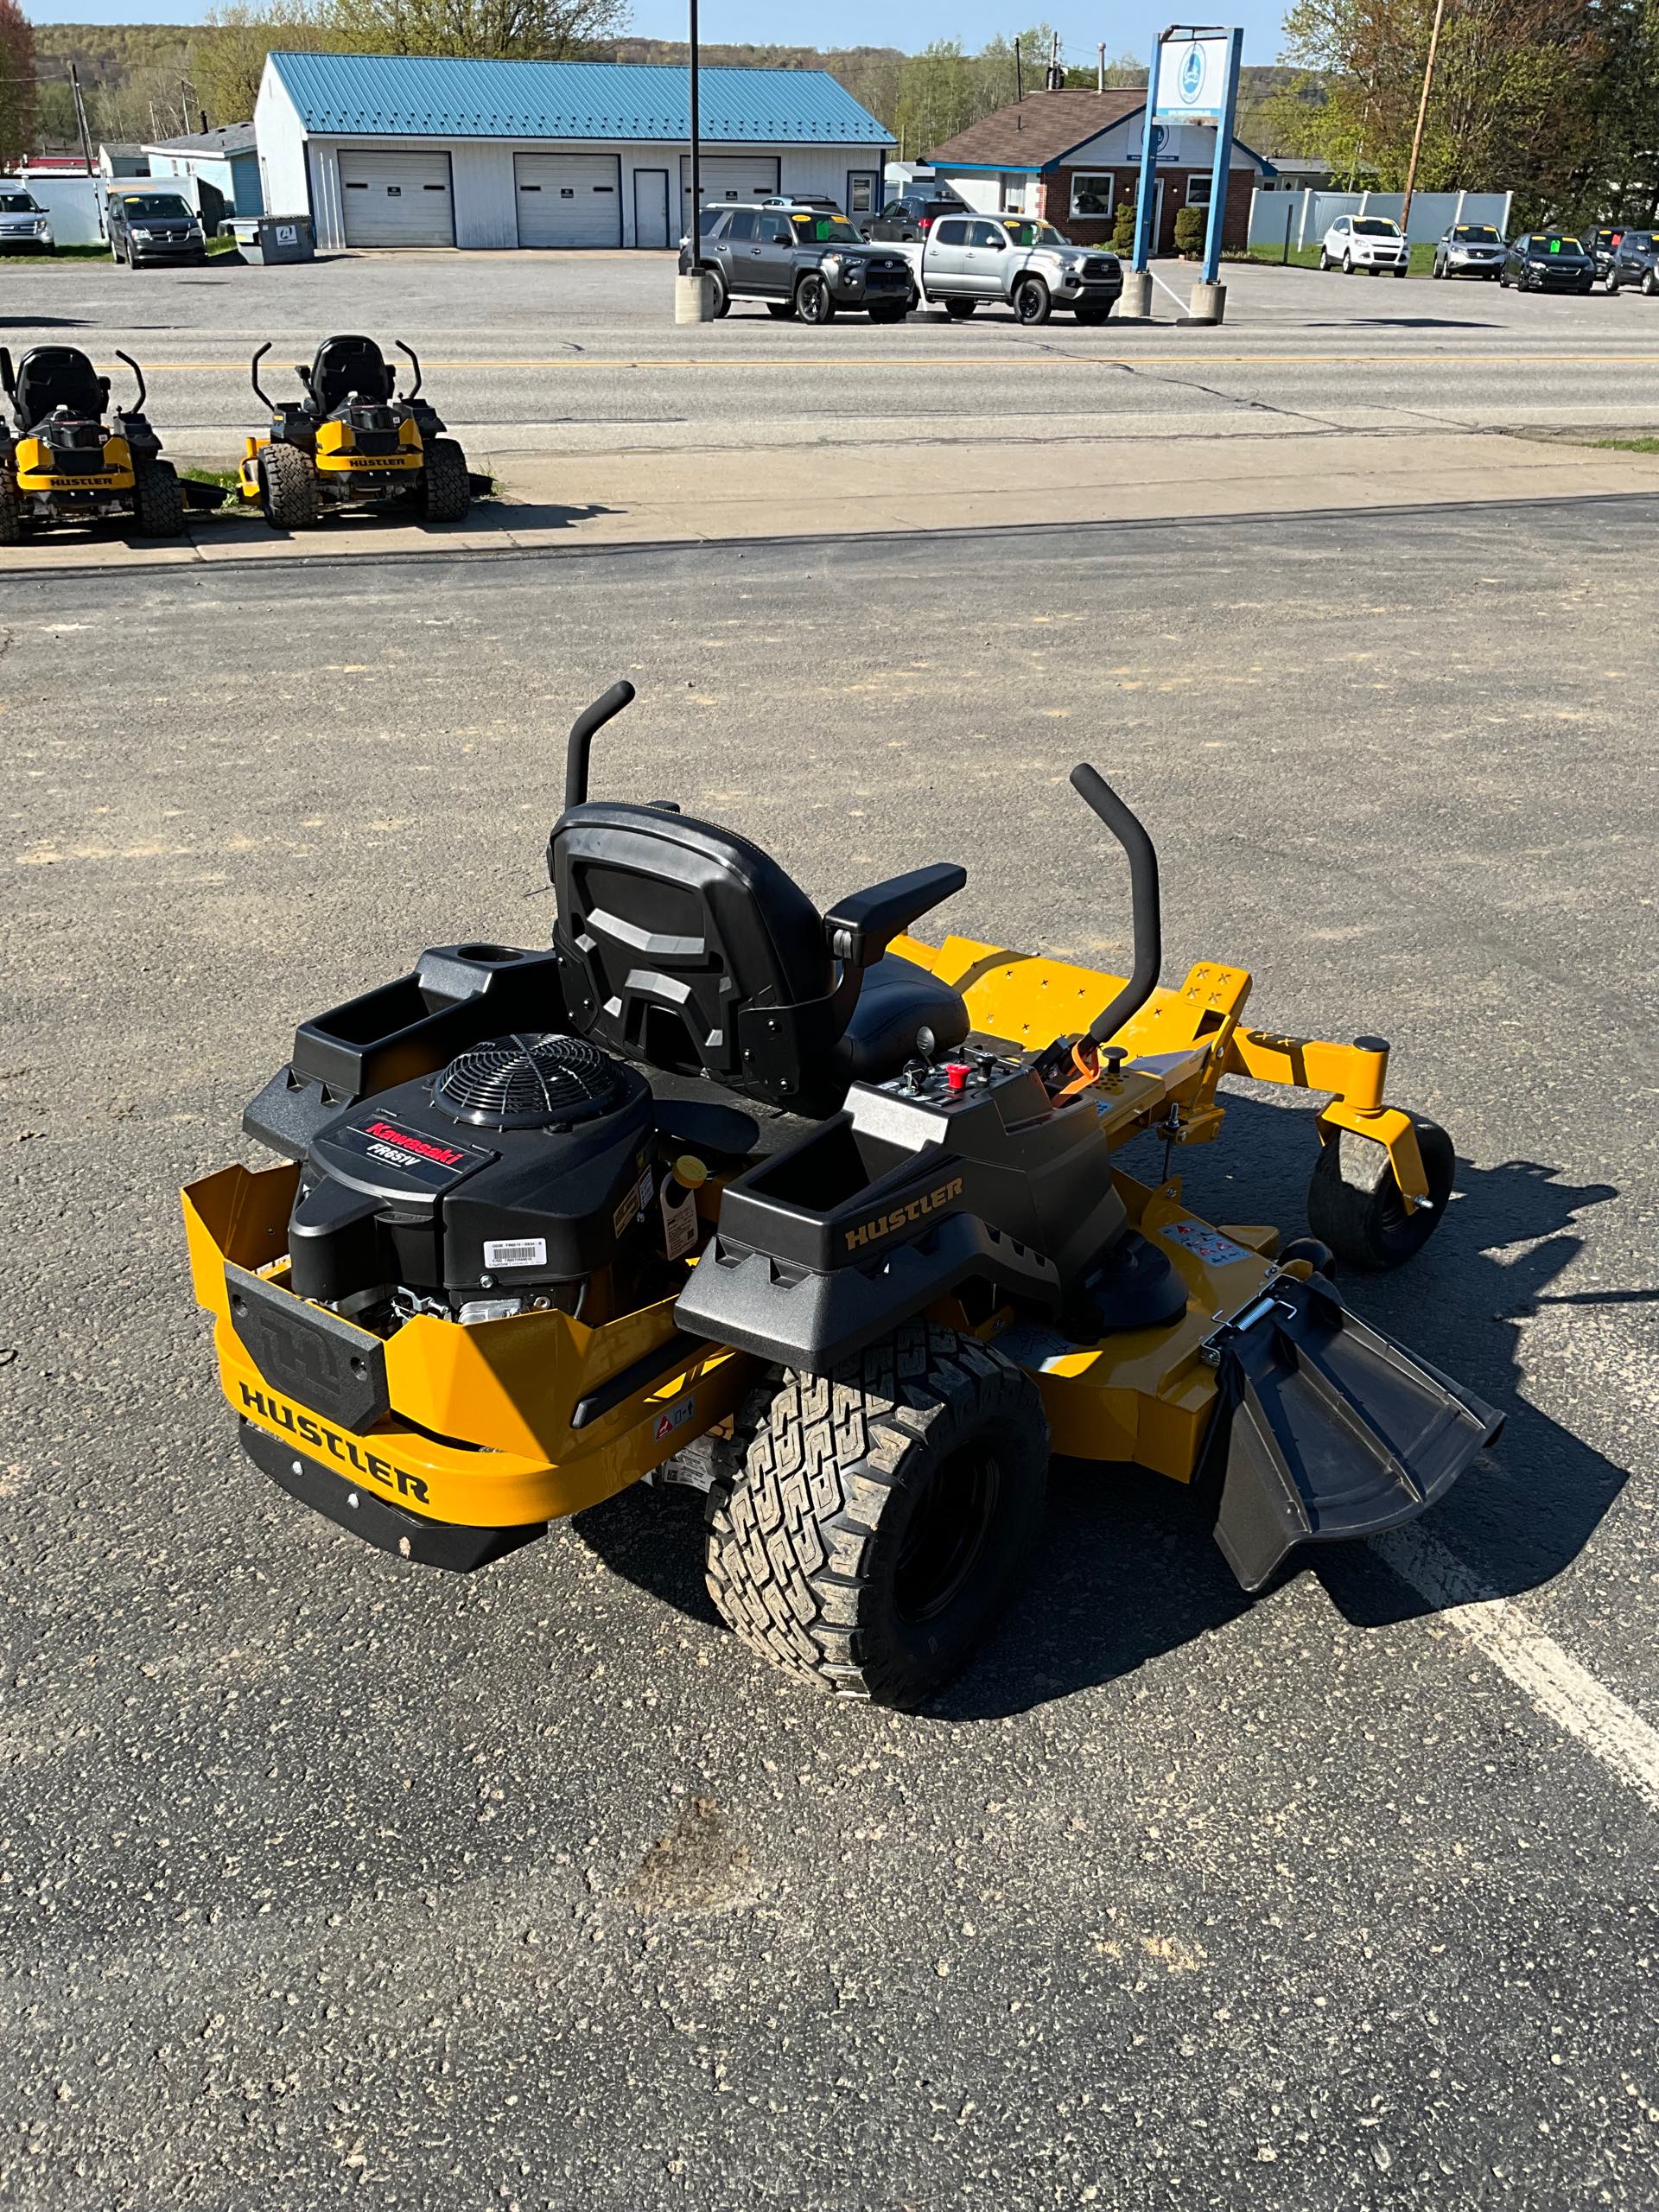 2022 Hustler Residential Mowers Residential Mowers Raptor X 54 at Leisure Time Powersports of Corry